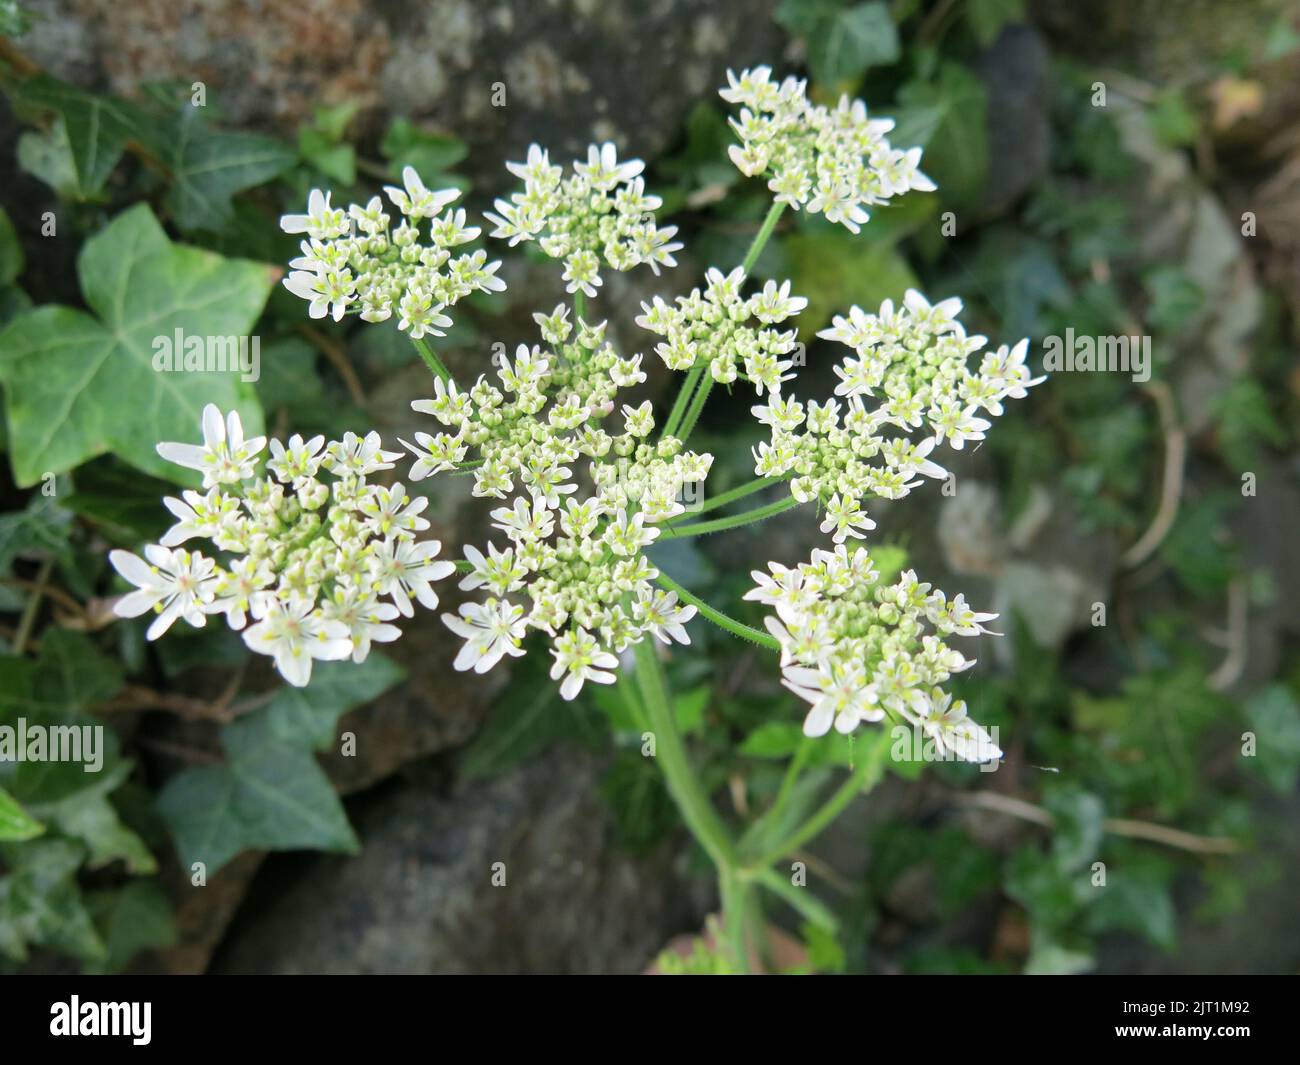 A close-up of the umbrella-like white flowers on a head of cow parsnip, nectar rich for insects and common throughout the English countryside. Stock Photo